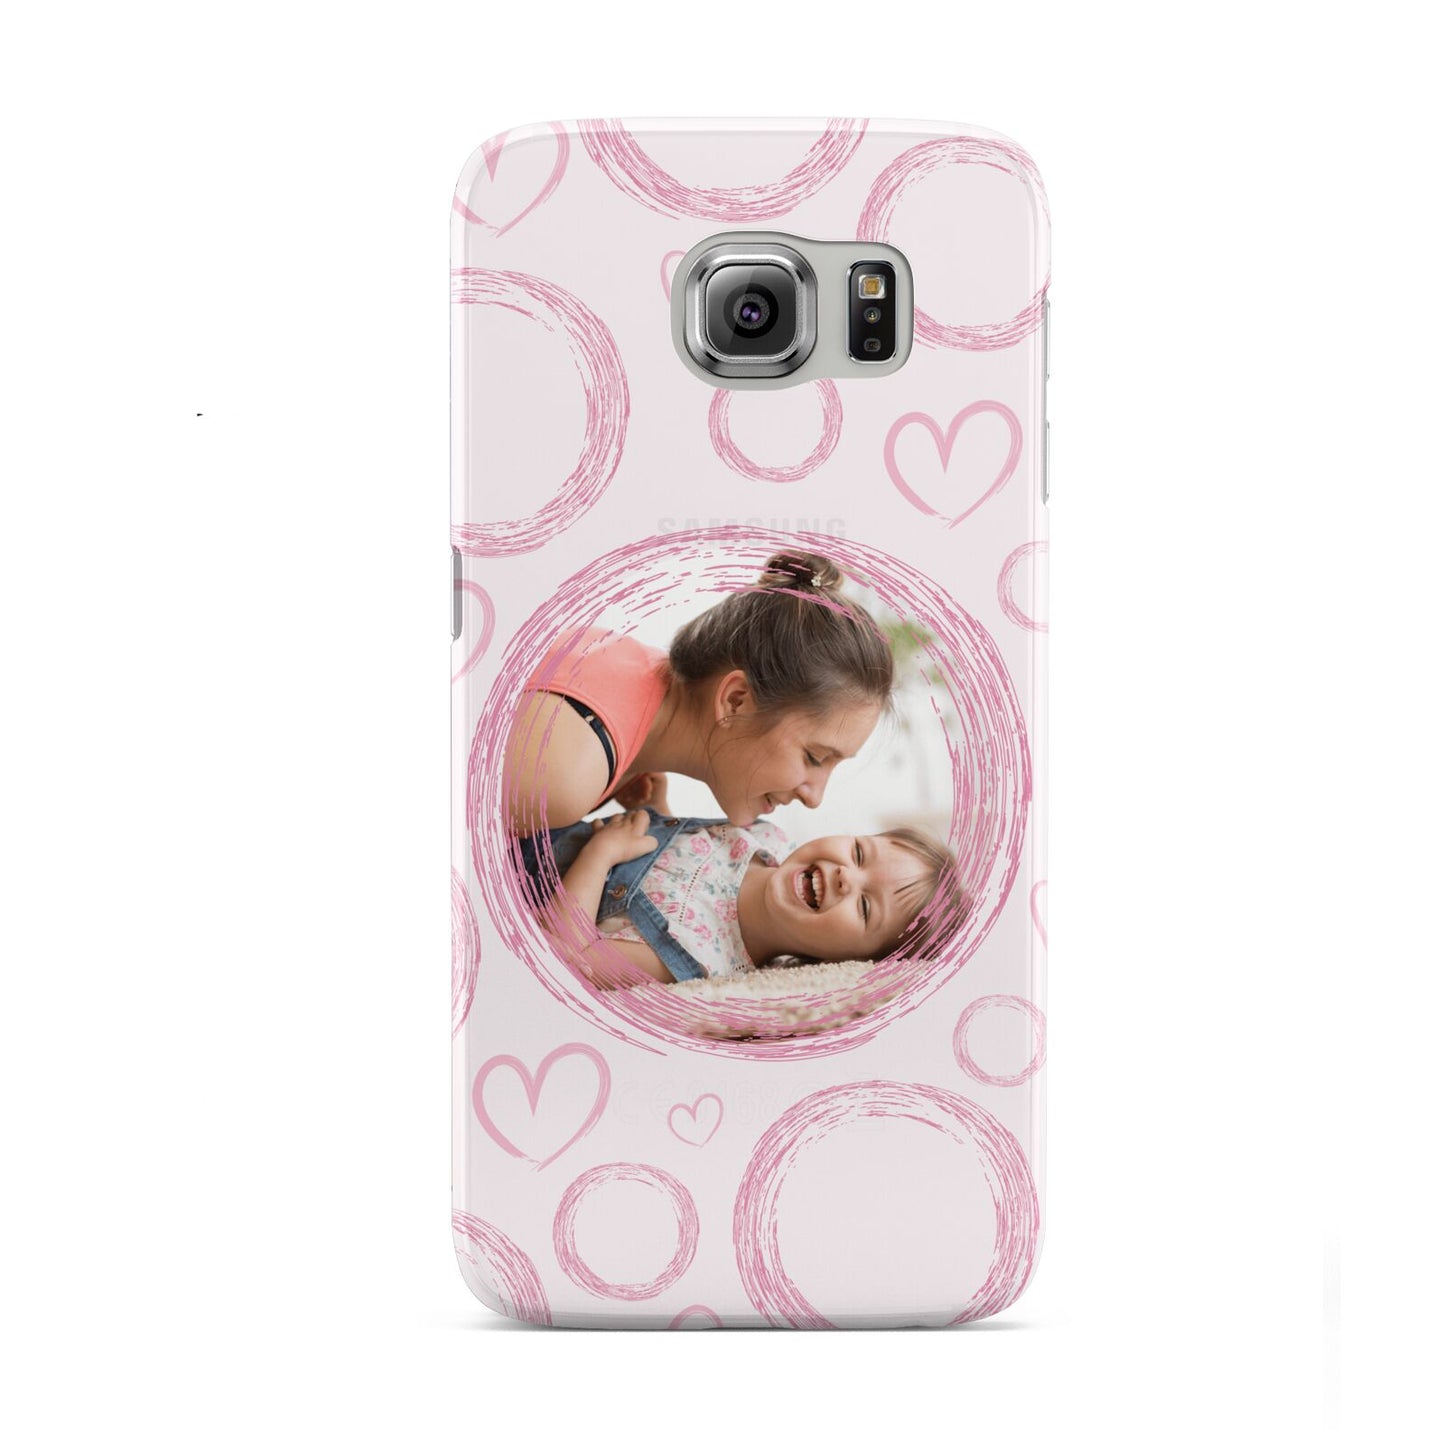 Pink Love Hearts Photo Personalised Samsung Galaxy S6 Case